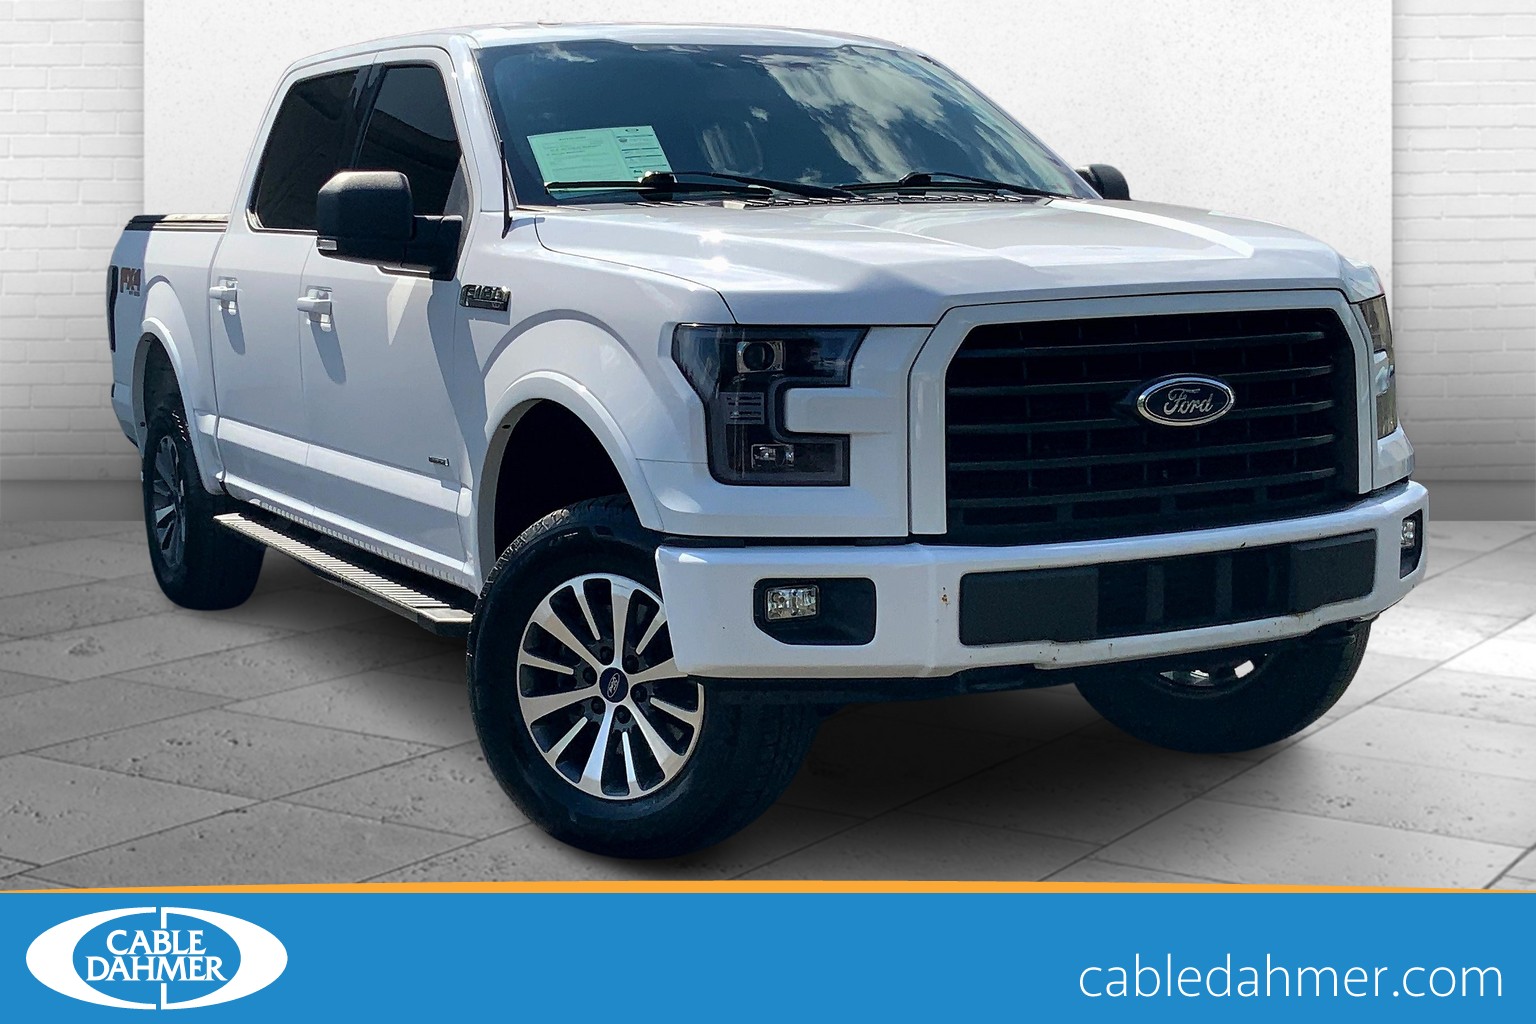 Discover the Optimal Quantity of Antifreeze for Your Ford F150